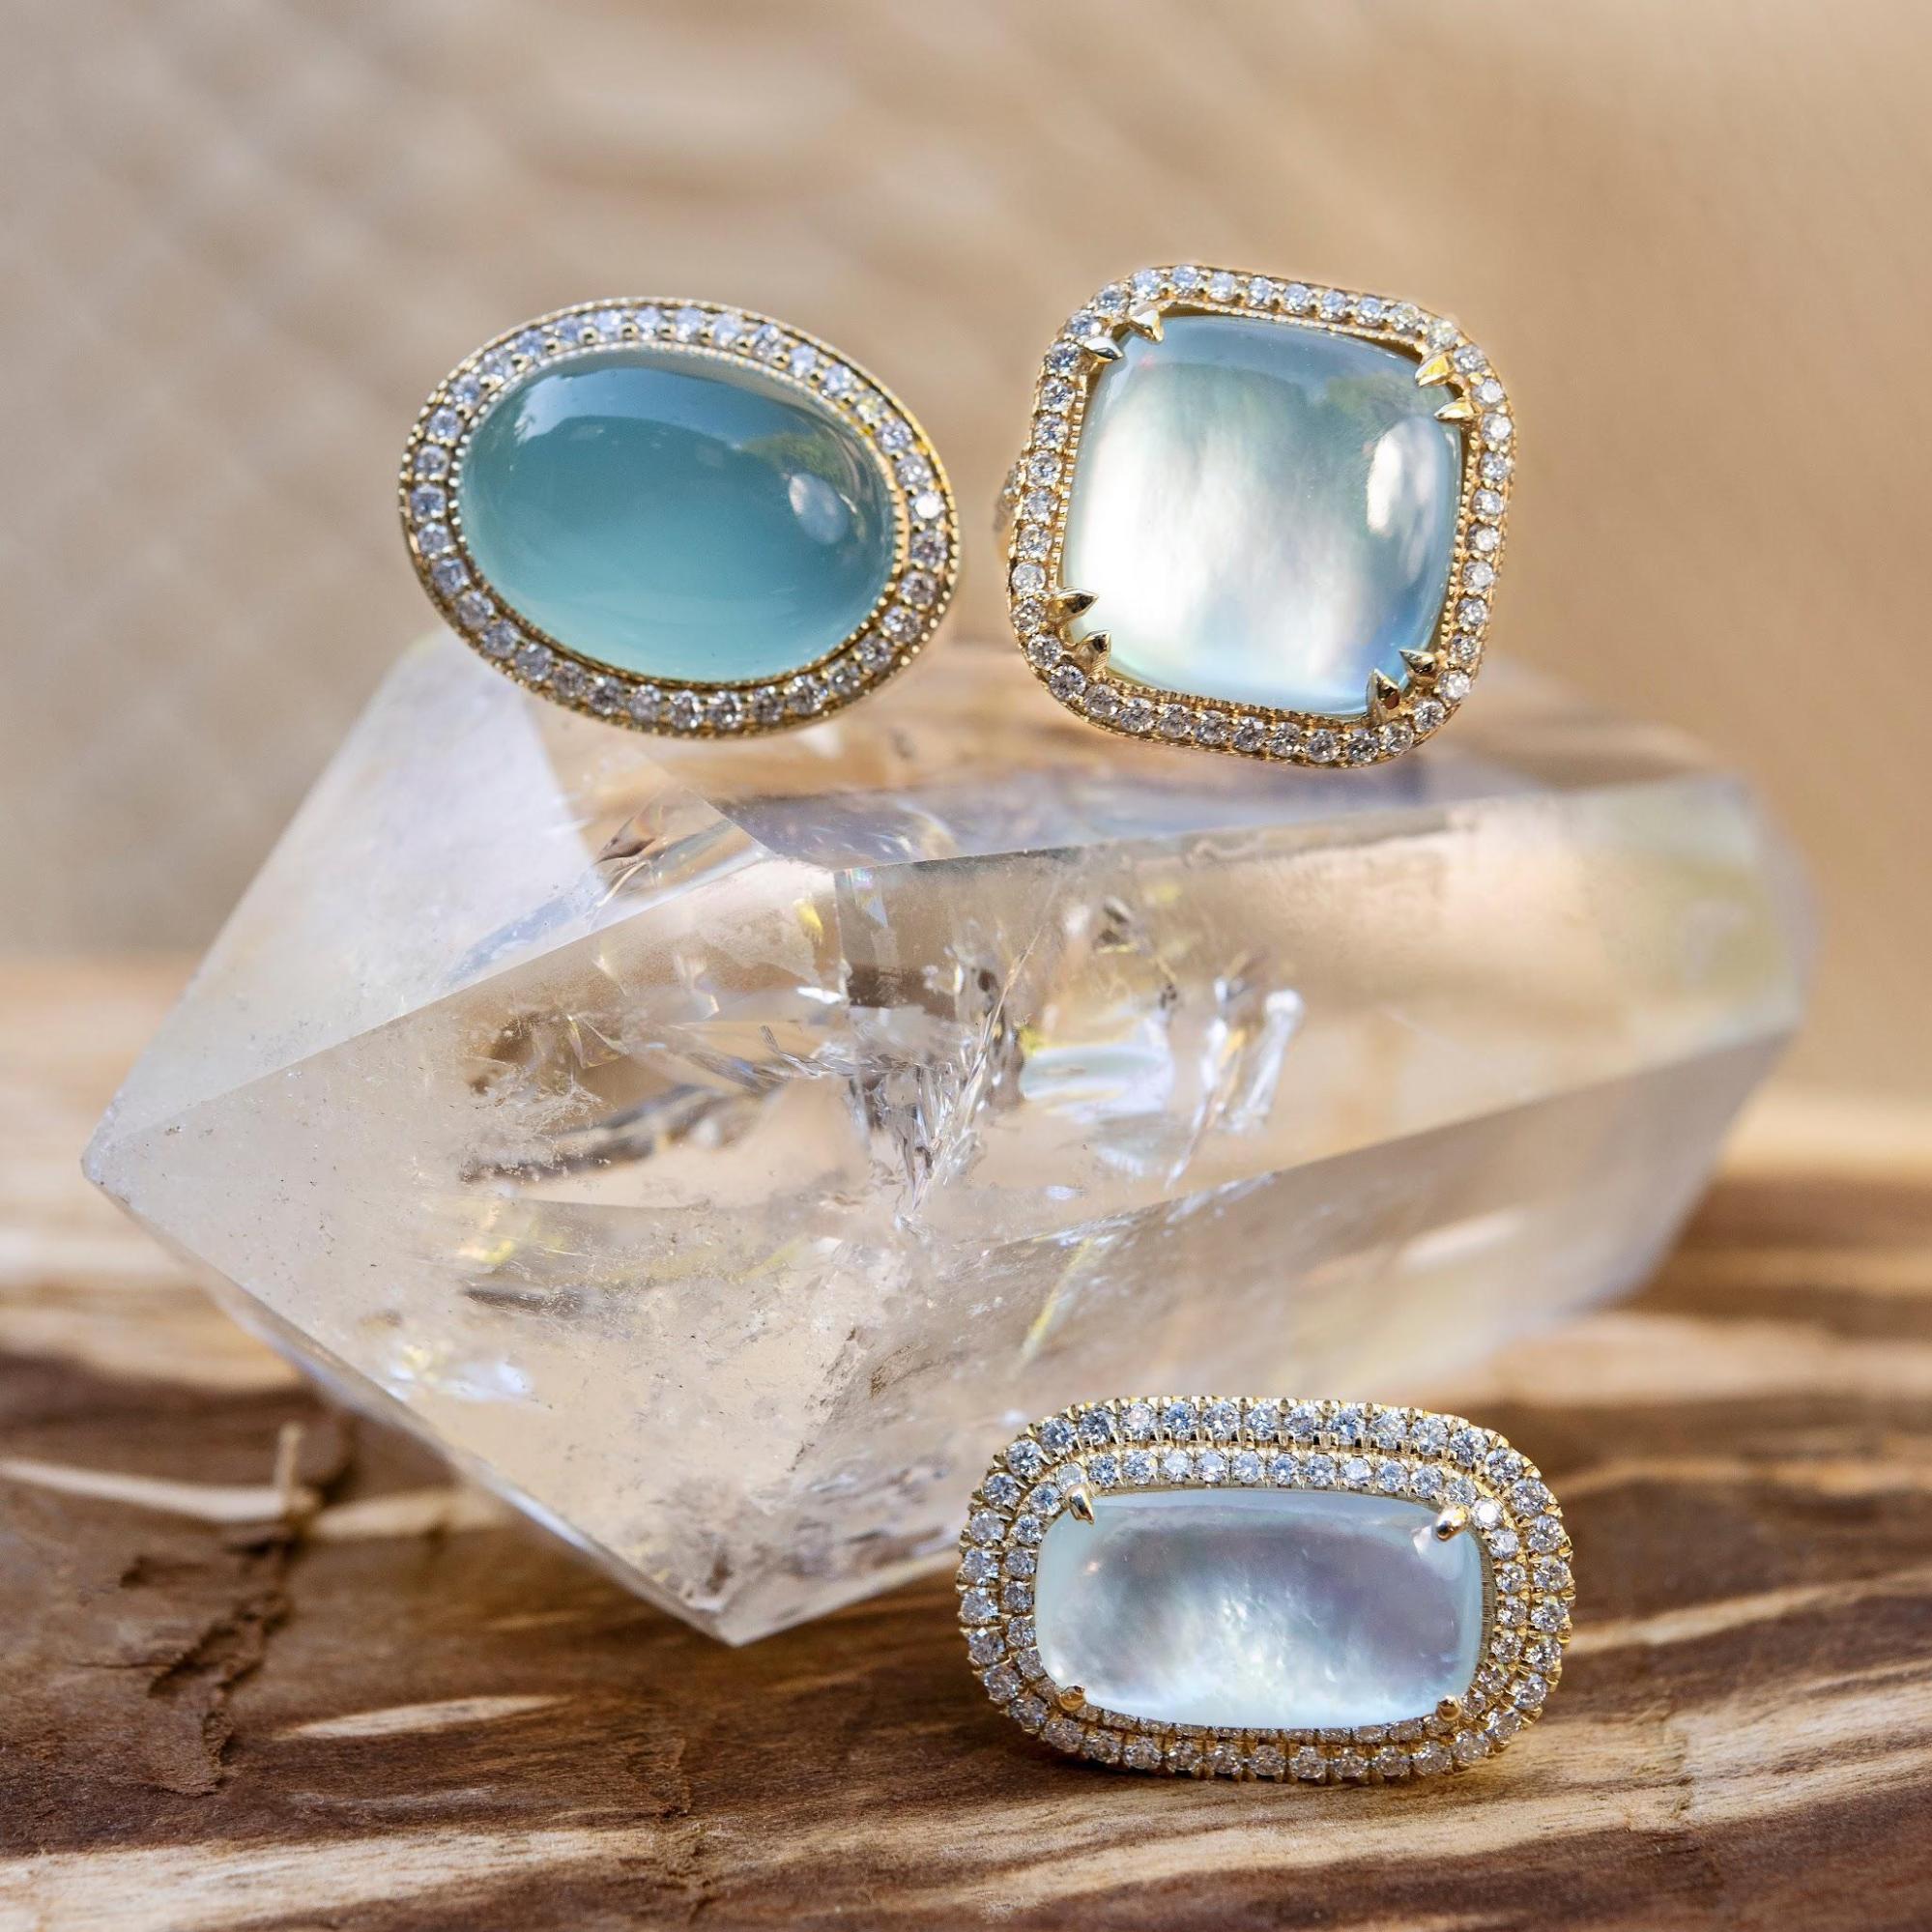 7 Gemstone Benefits That May Surprise You